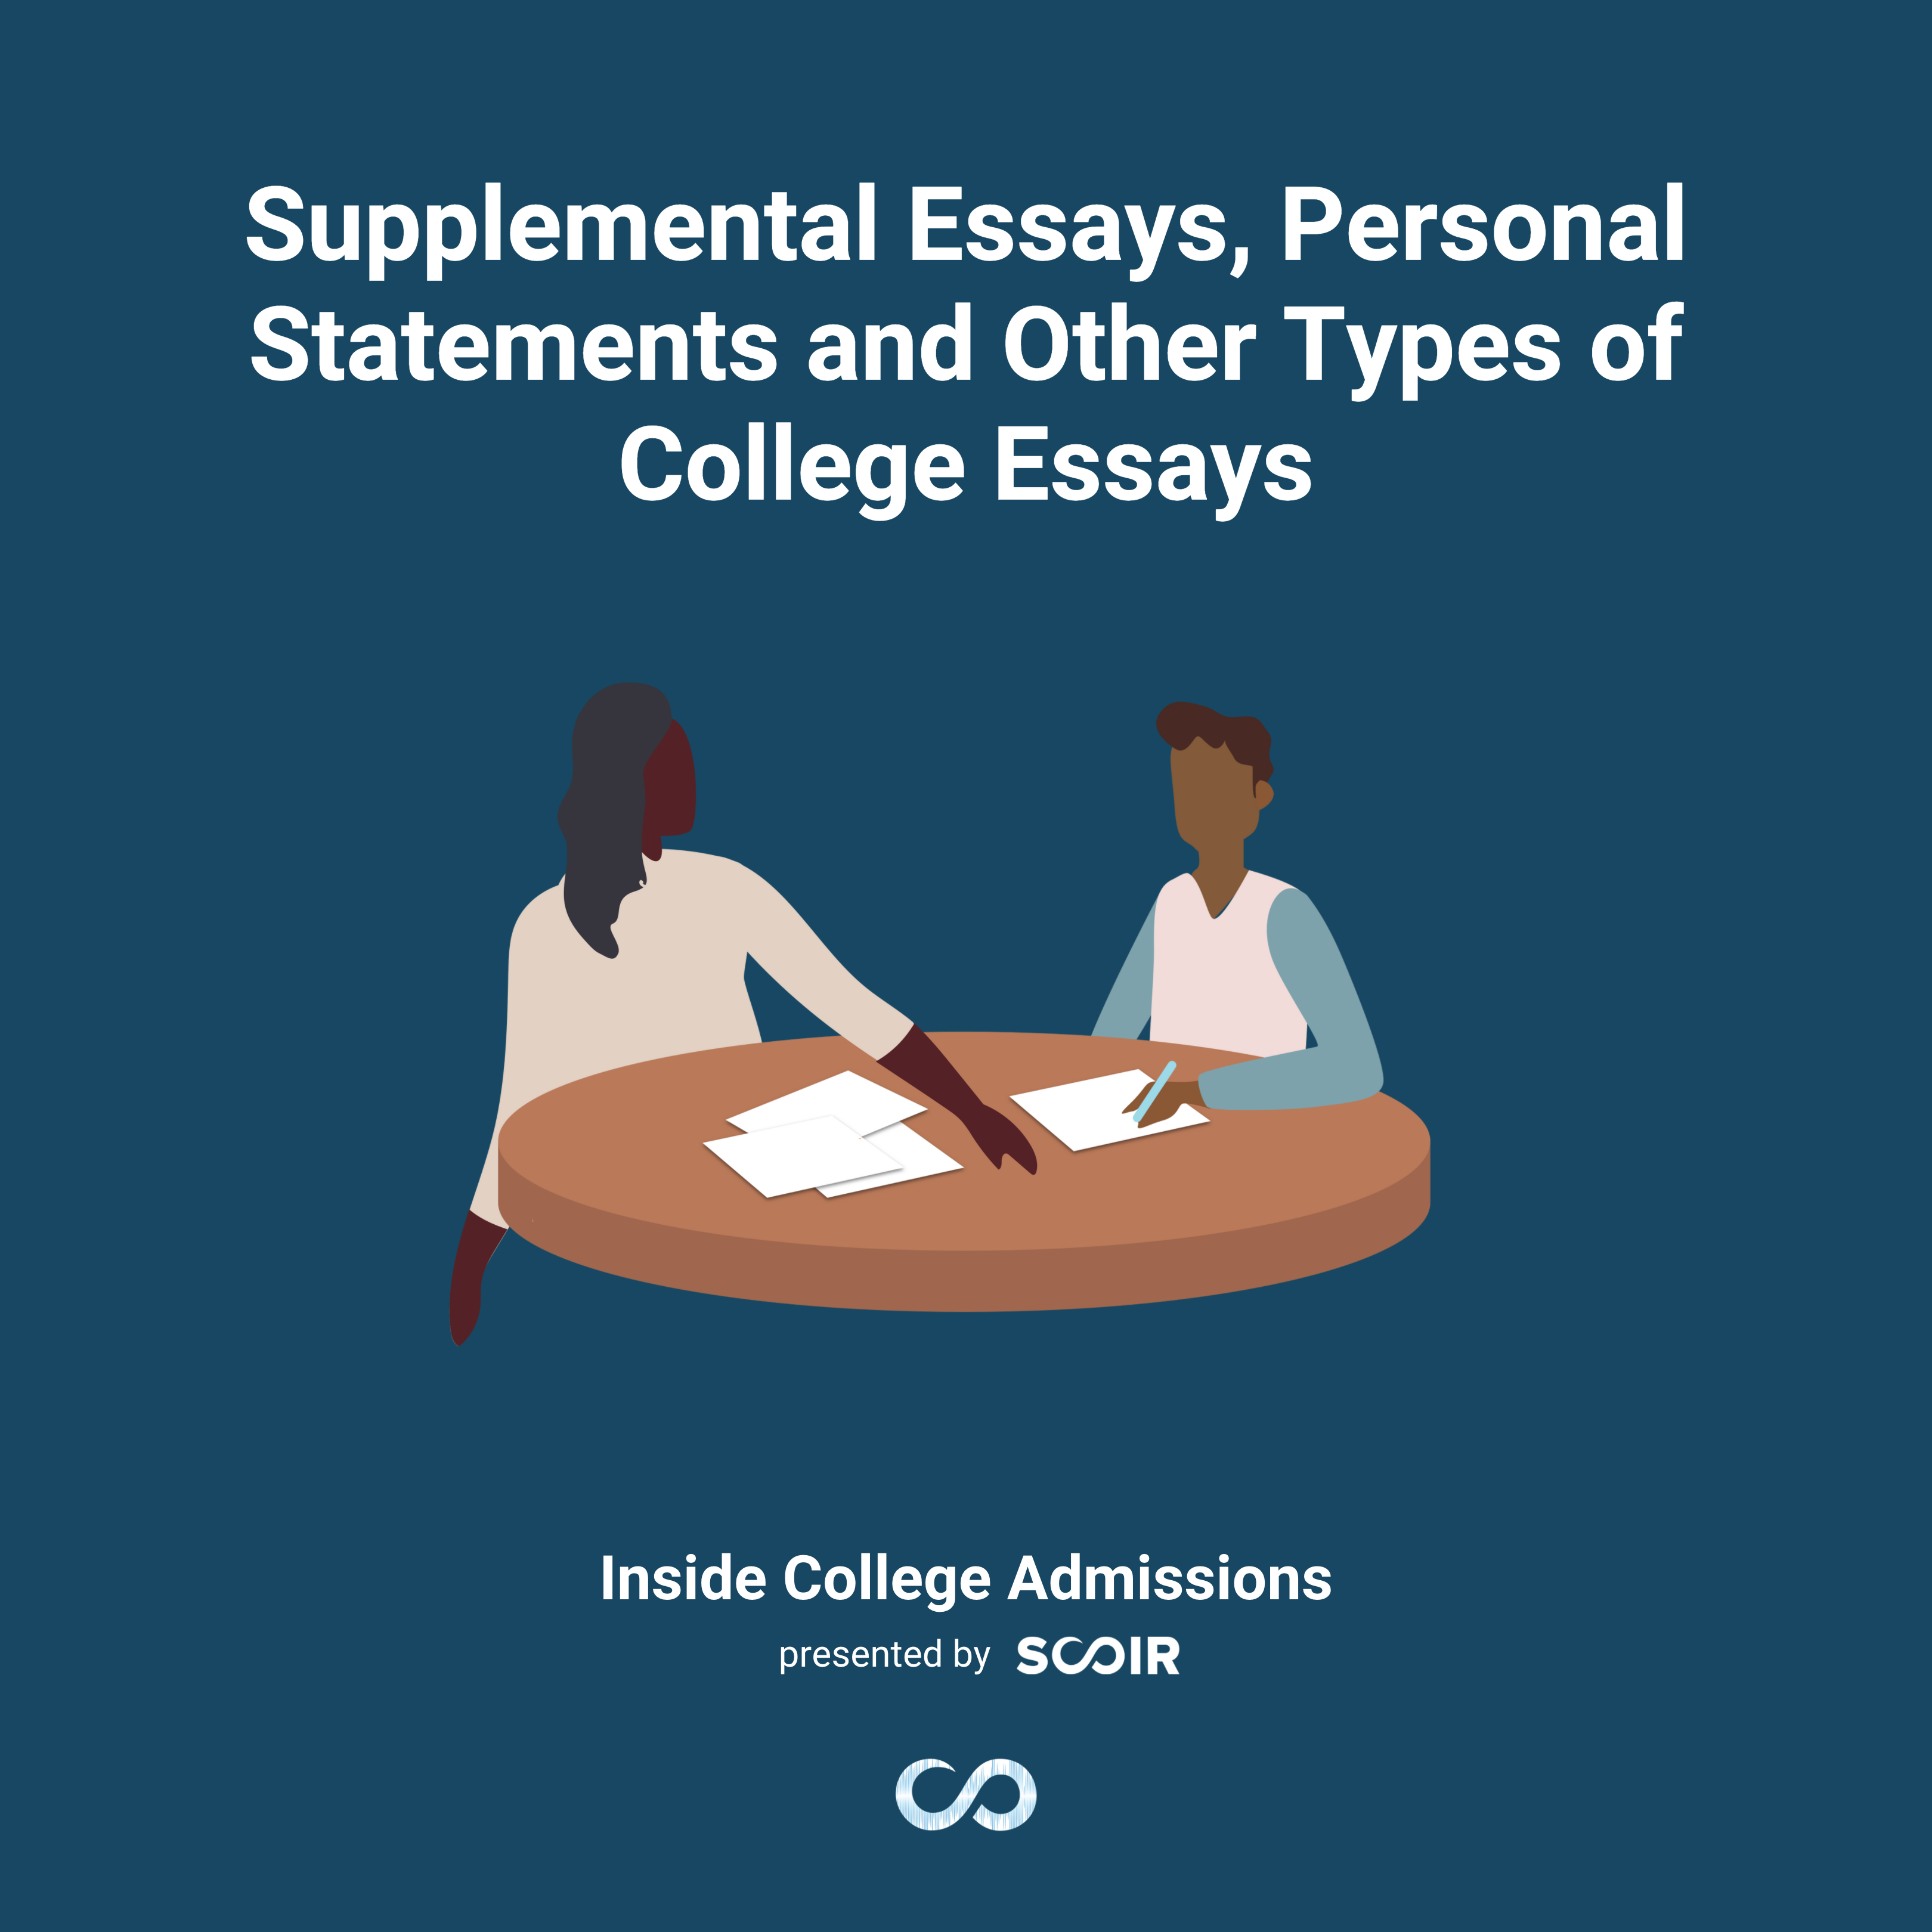 Supplemental Essays, Personal Statements and Other Types of College Essays_insta